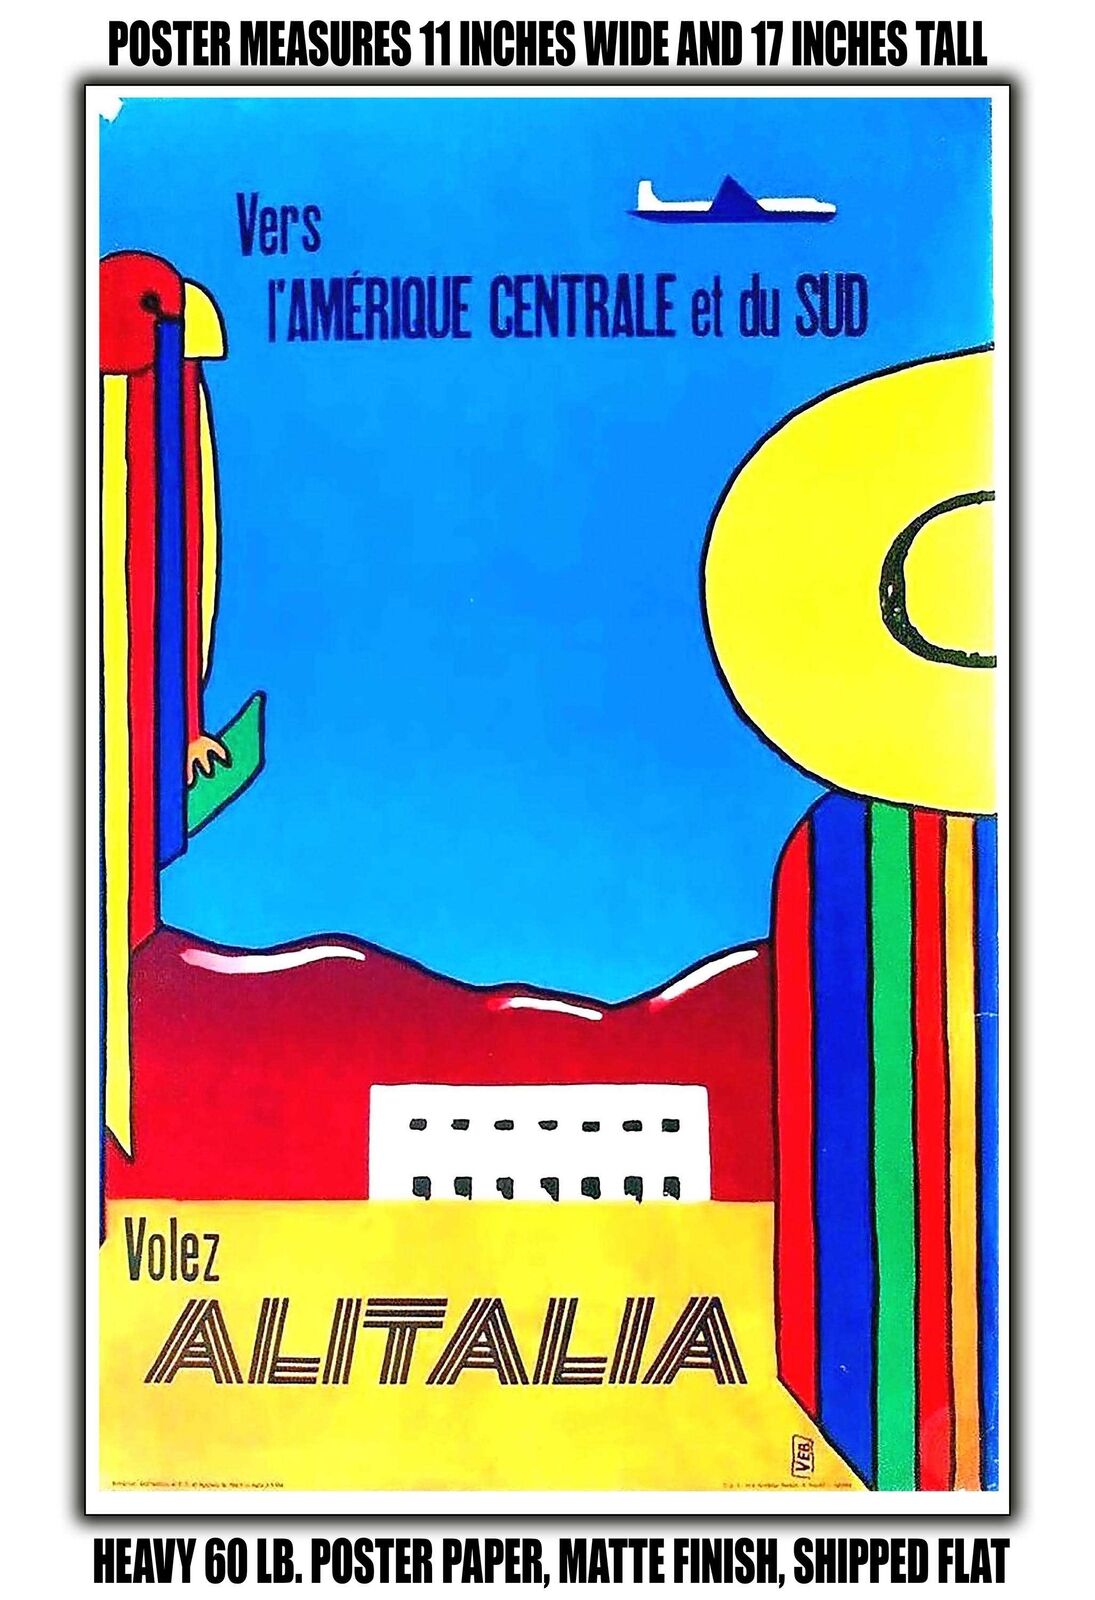 11x17 POSTER - 1956 To Central and South America Fly Alitalia